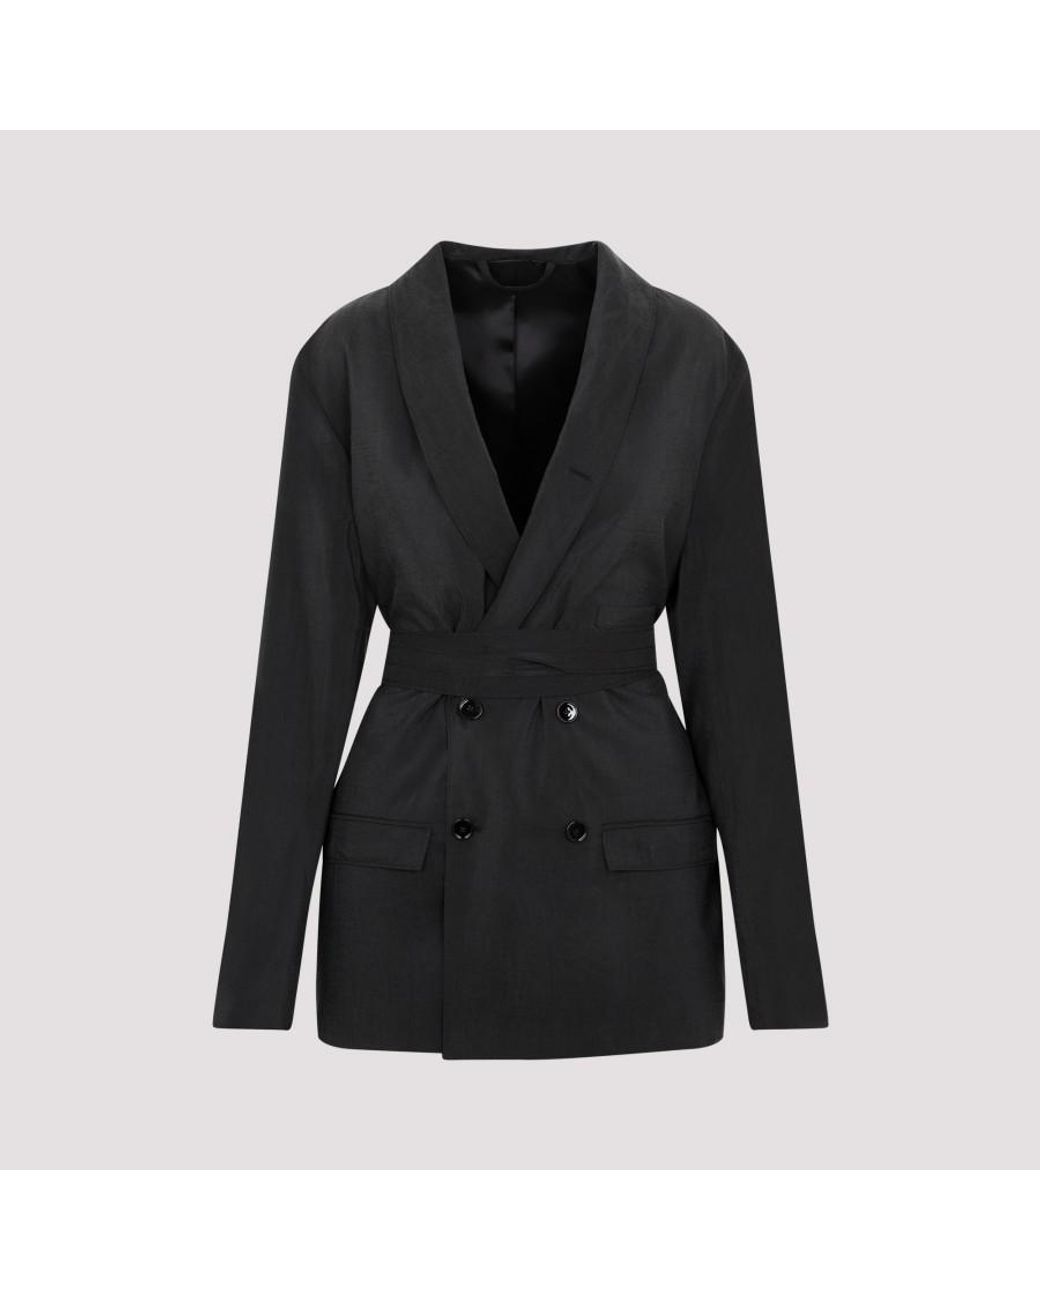 Lemaire Belted Double Breast Jacket in Black | Lyst